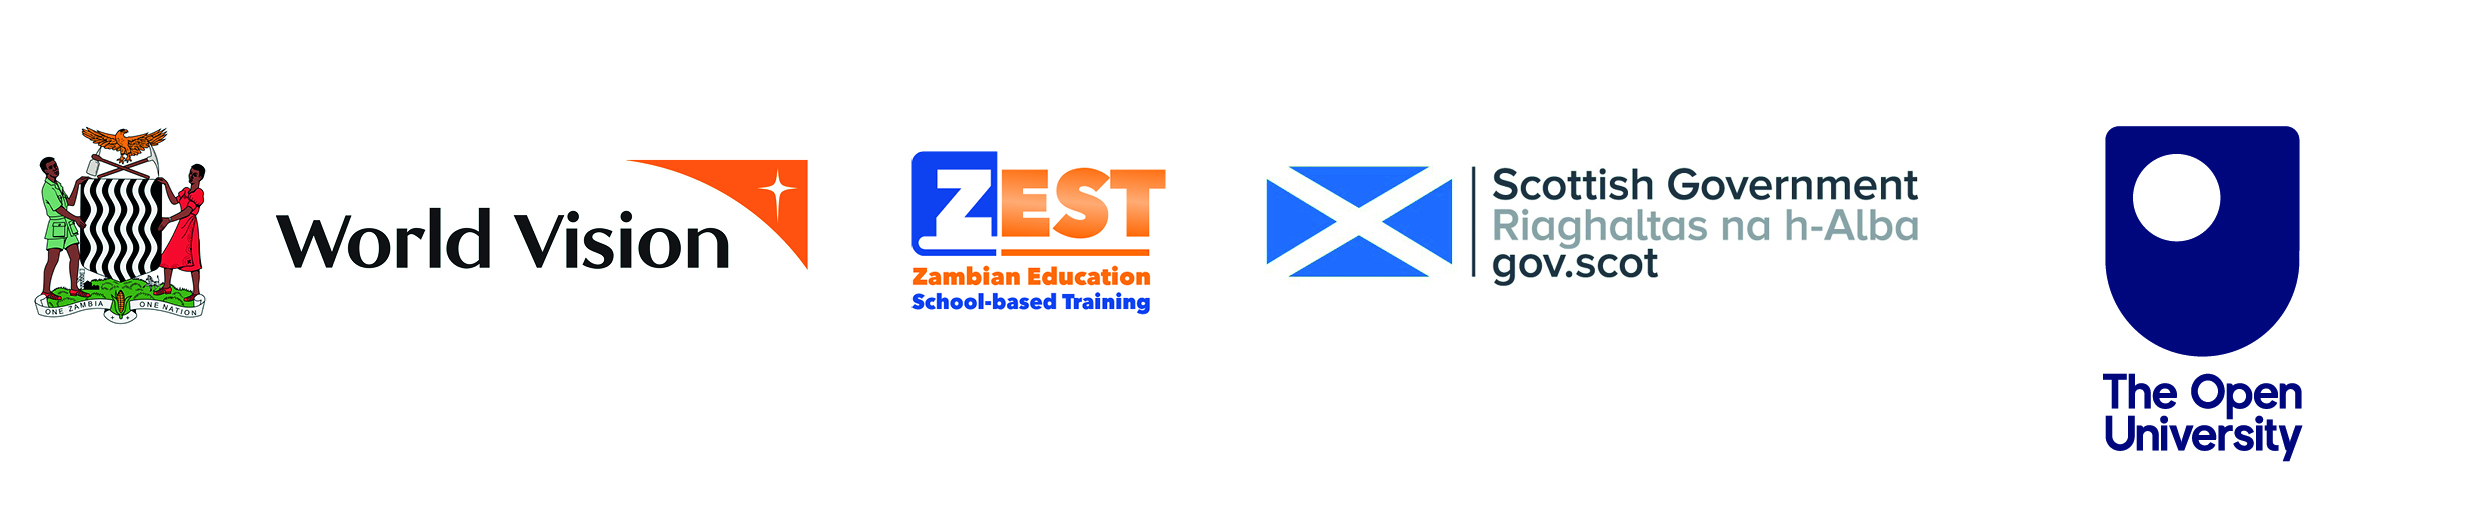 4 logos from left to right, Ministry of Education Zambia, World Vision, Scottish Government and The Open University